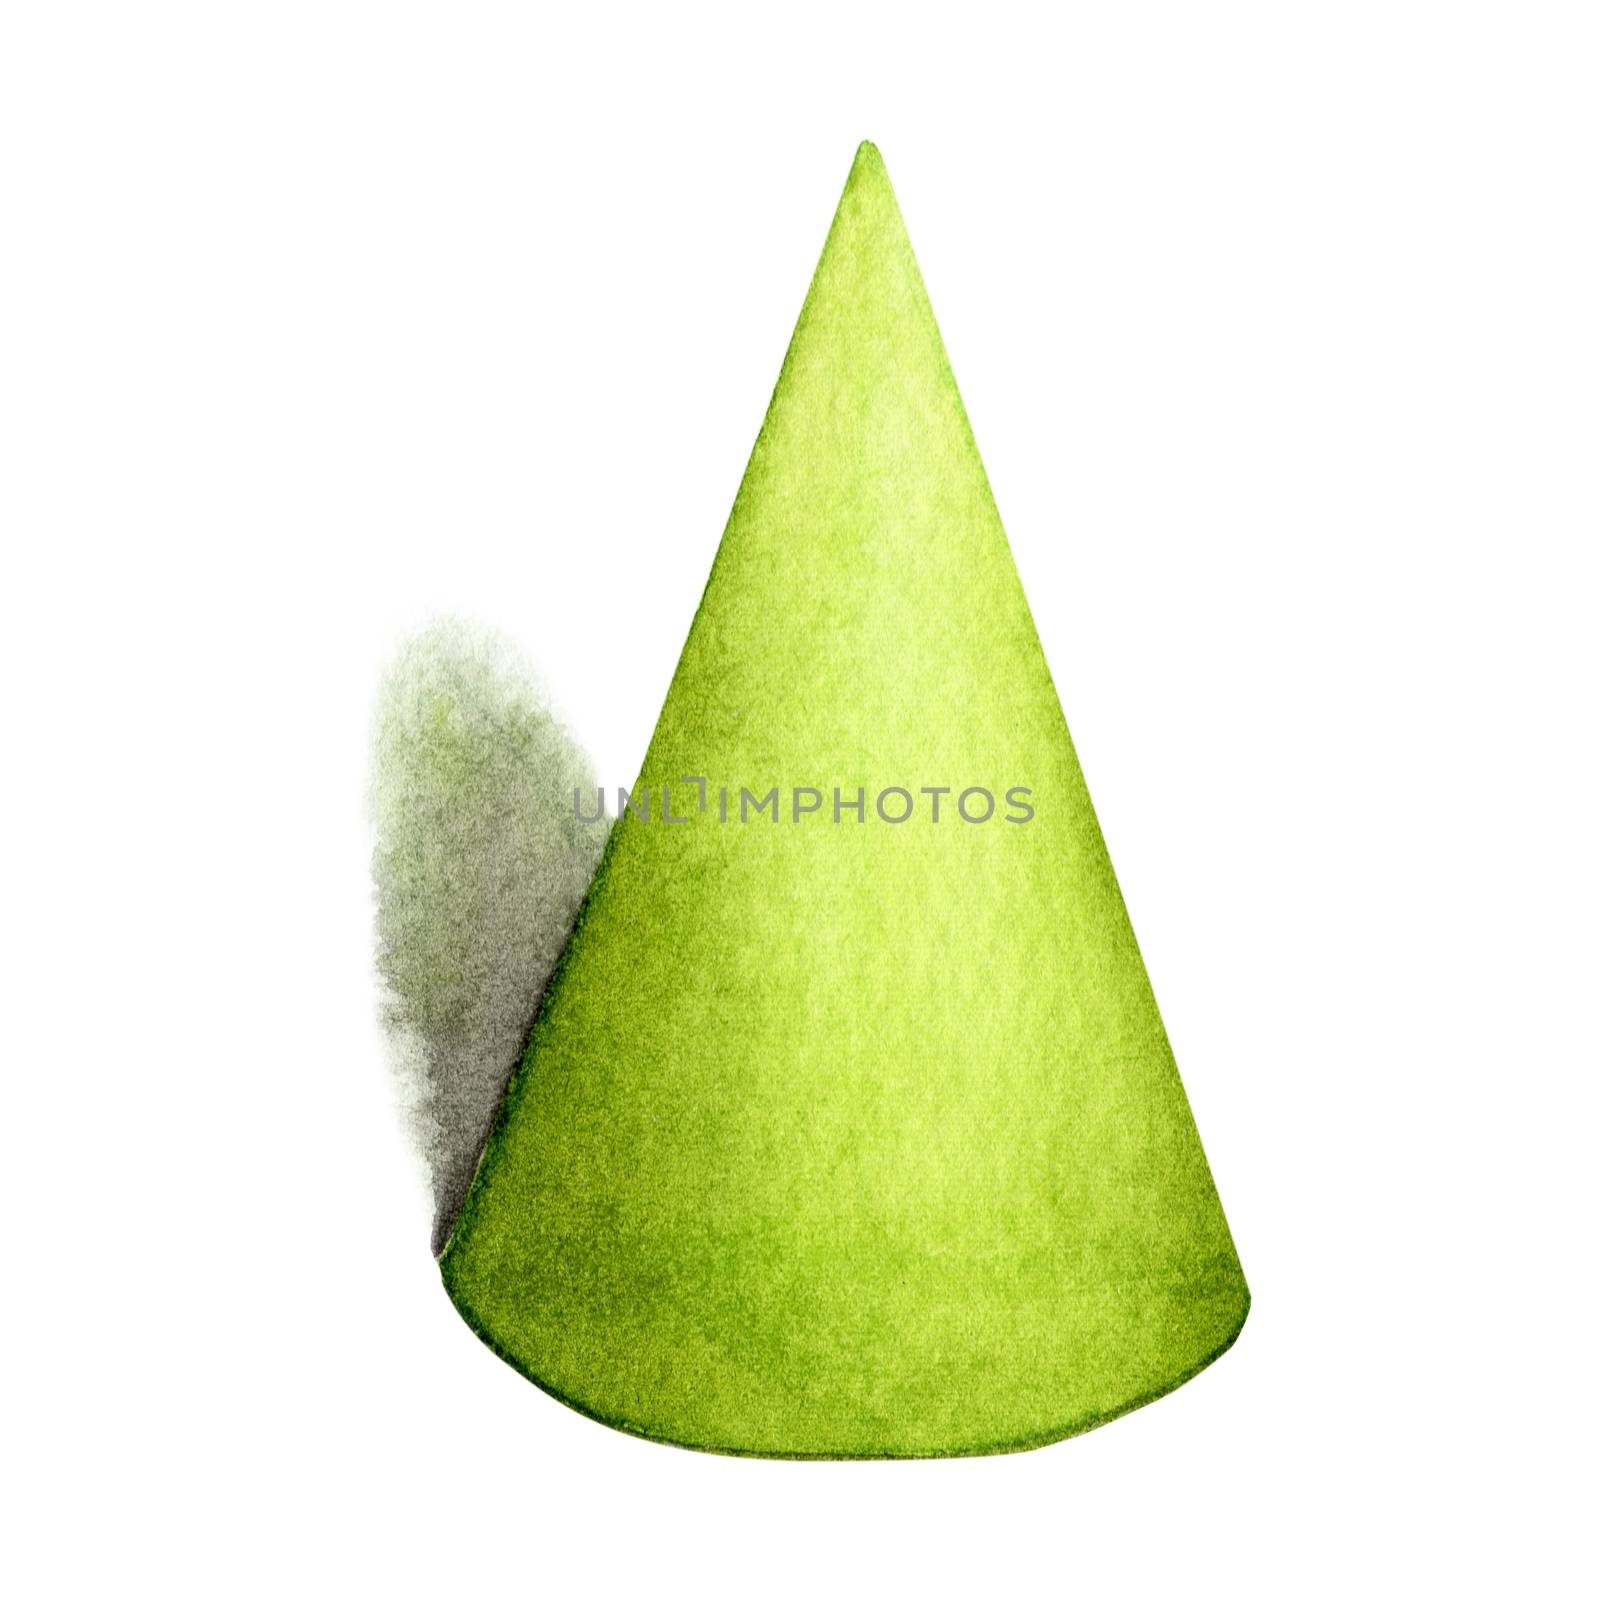 Green cone, basic geometric shapes with dramatic light and shadow in watercolor style. Solids isolated on a white background. Clipping path. by Ungamrung